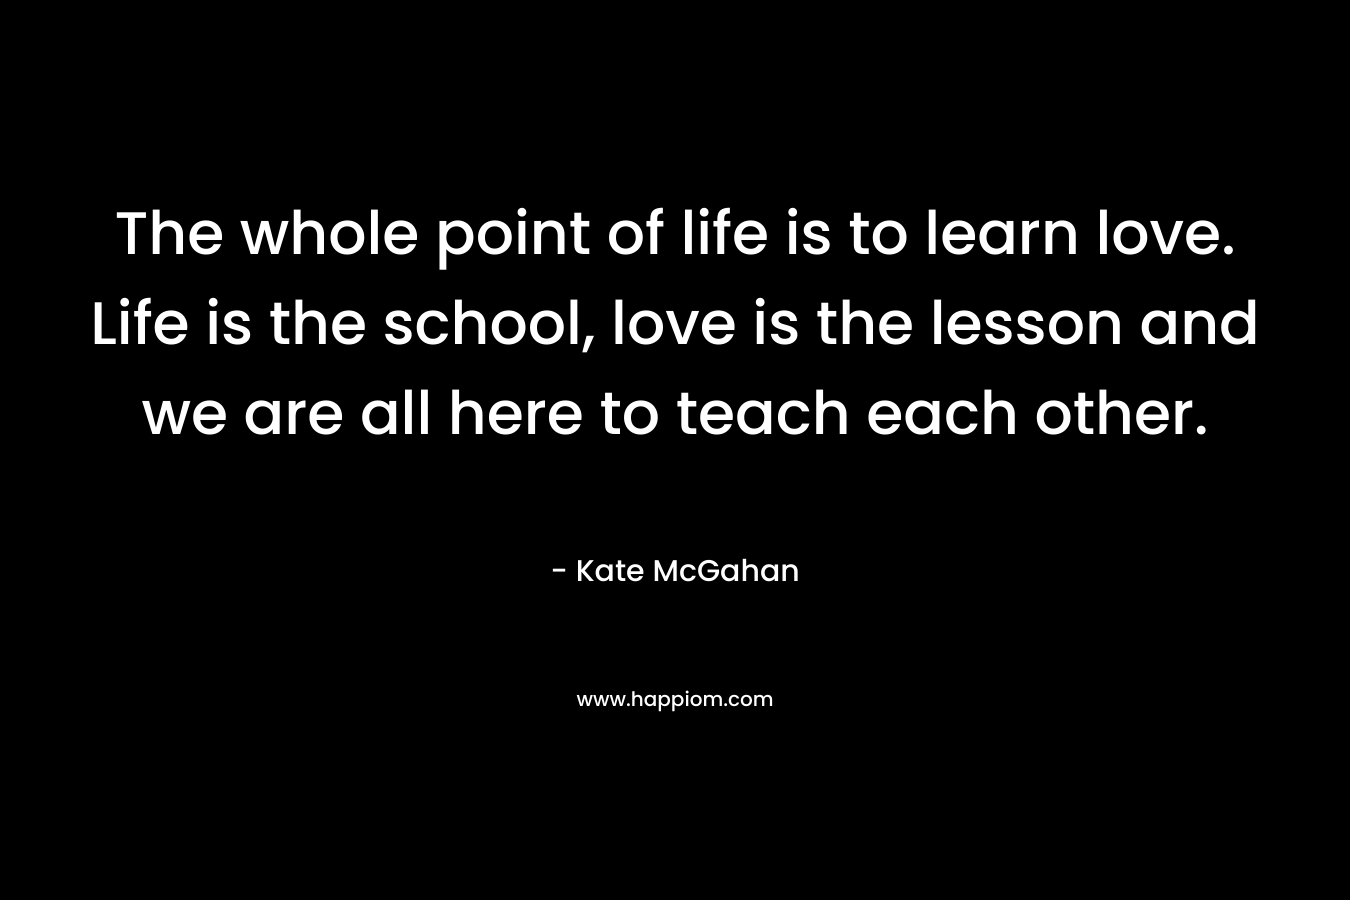 The whole point of life is to learn love. Life is the school, love is the lesson and we are all here to teach each other.